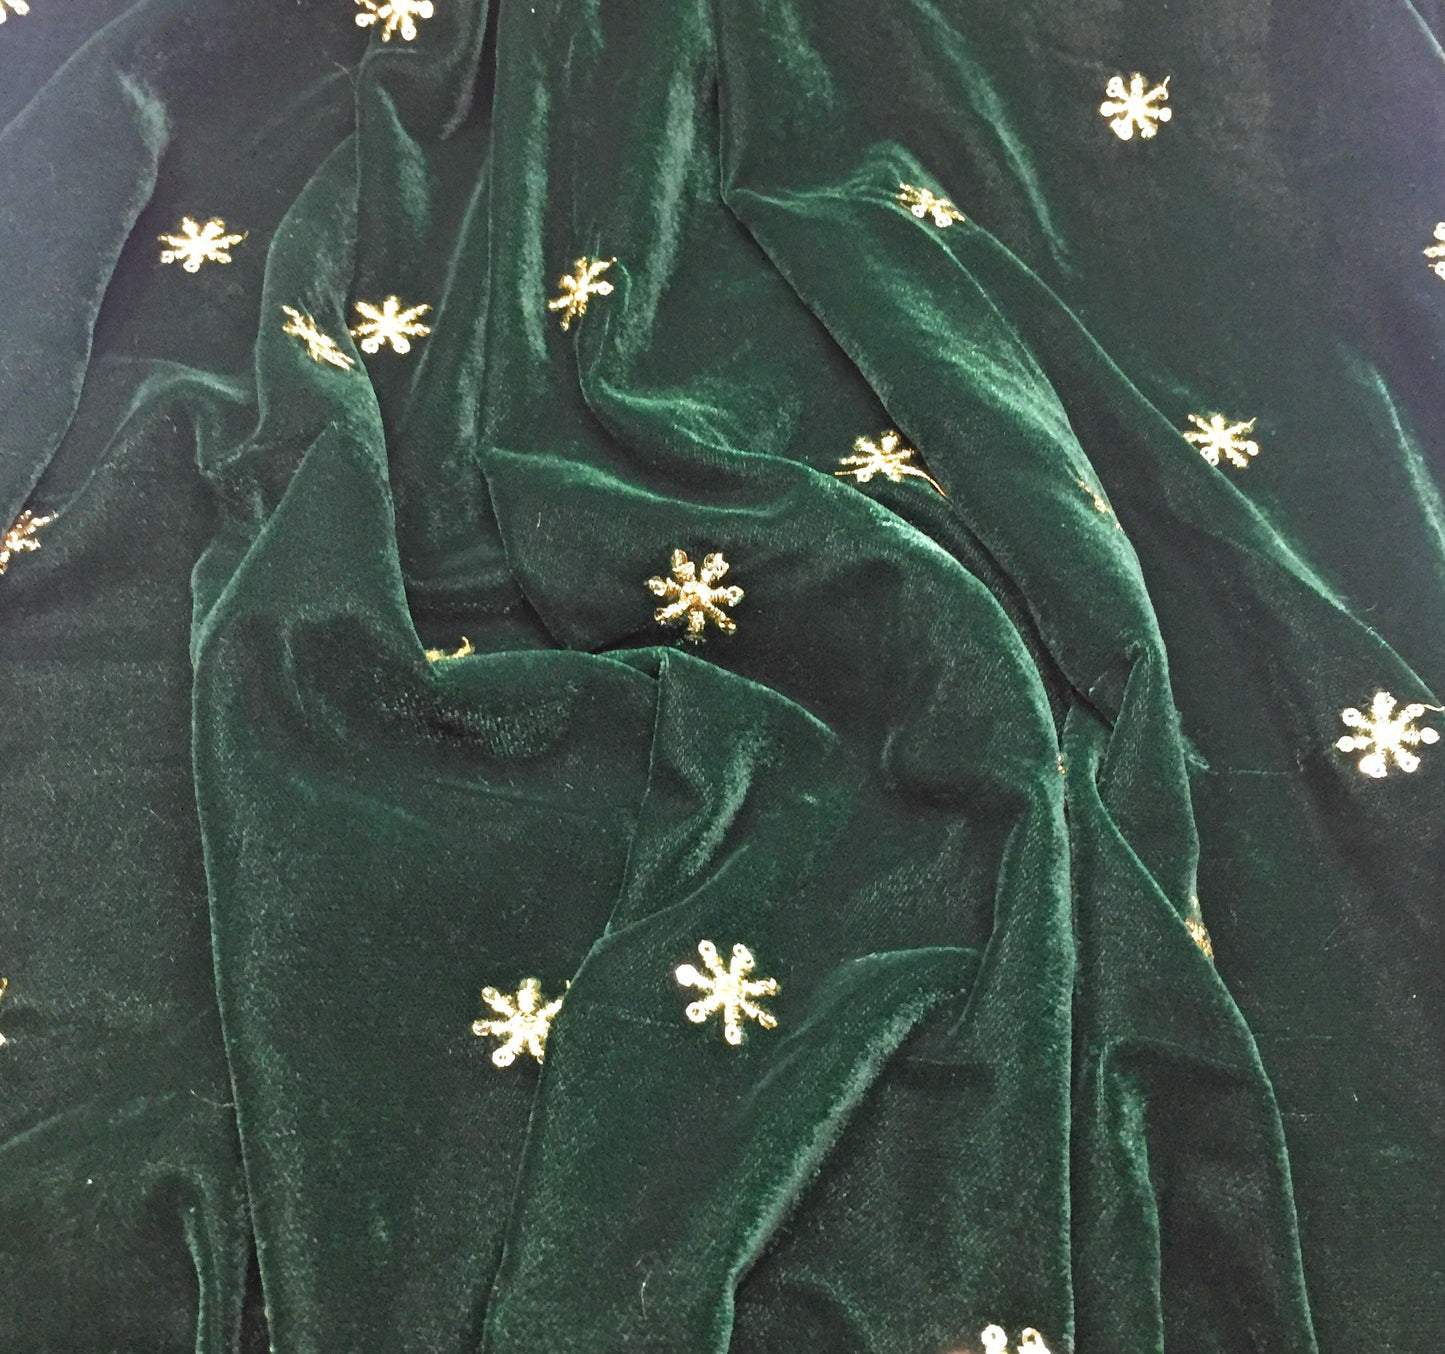 Green Velvet Fabric, Gold Sequin Embroidery Material by meter